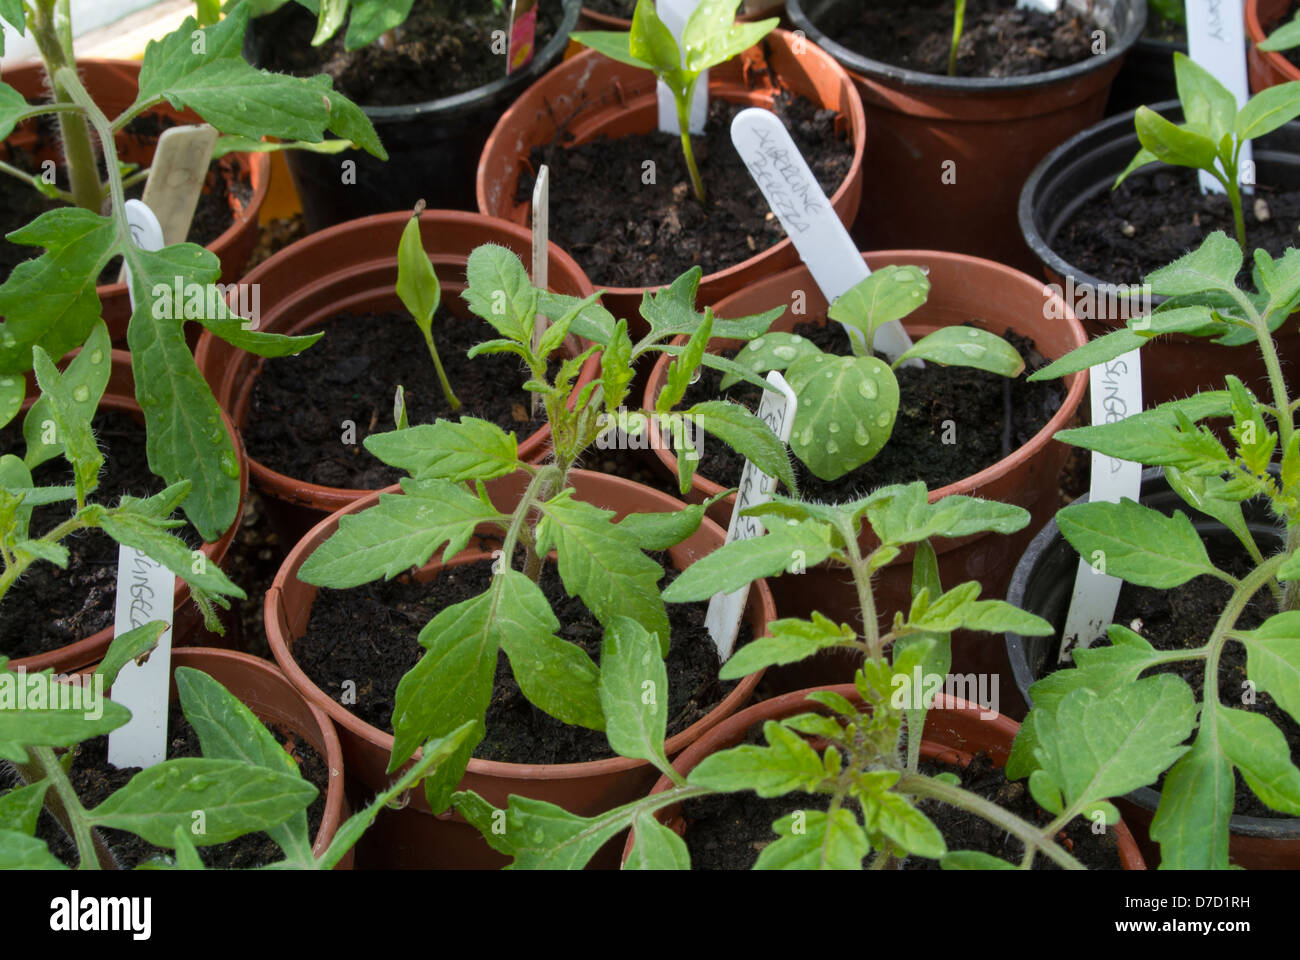 Young tomato, pepper and aubergine plants in 3.5 inch pots Stock Photo